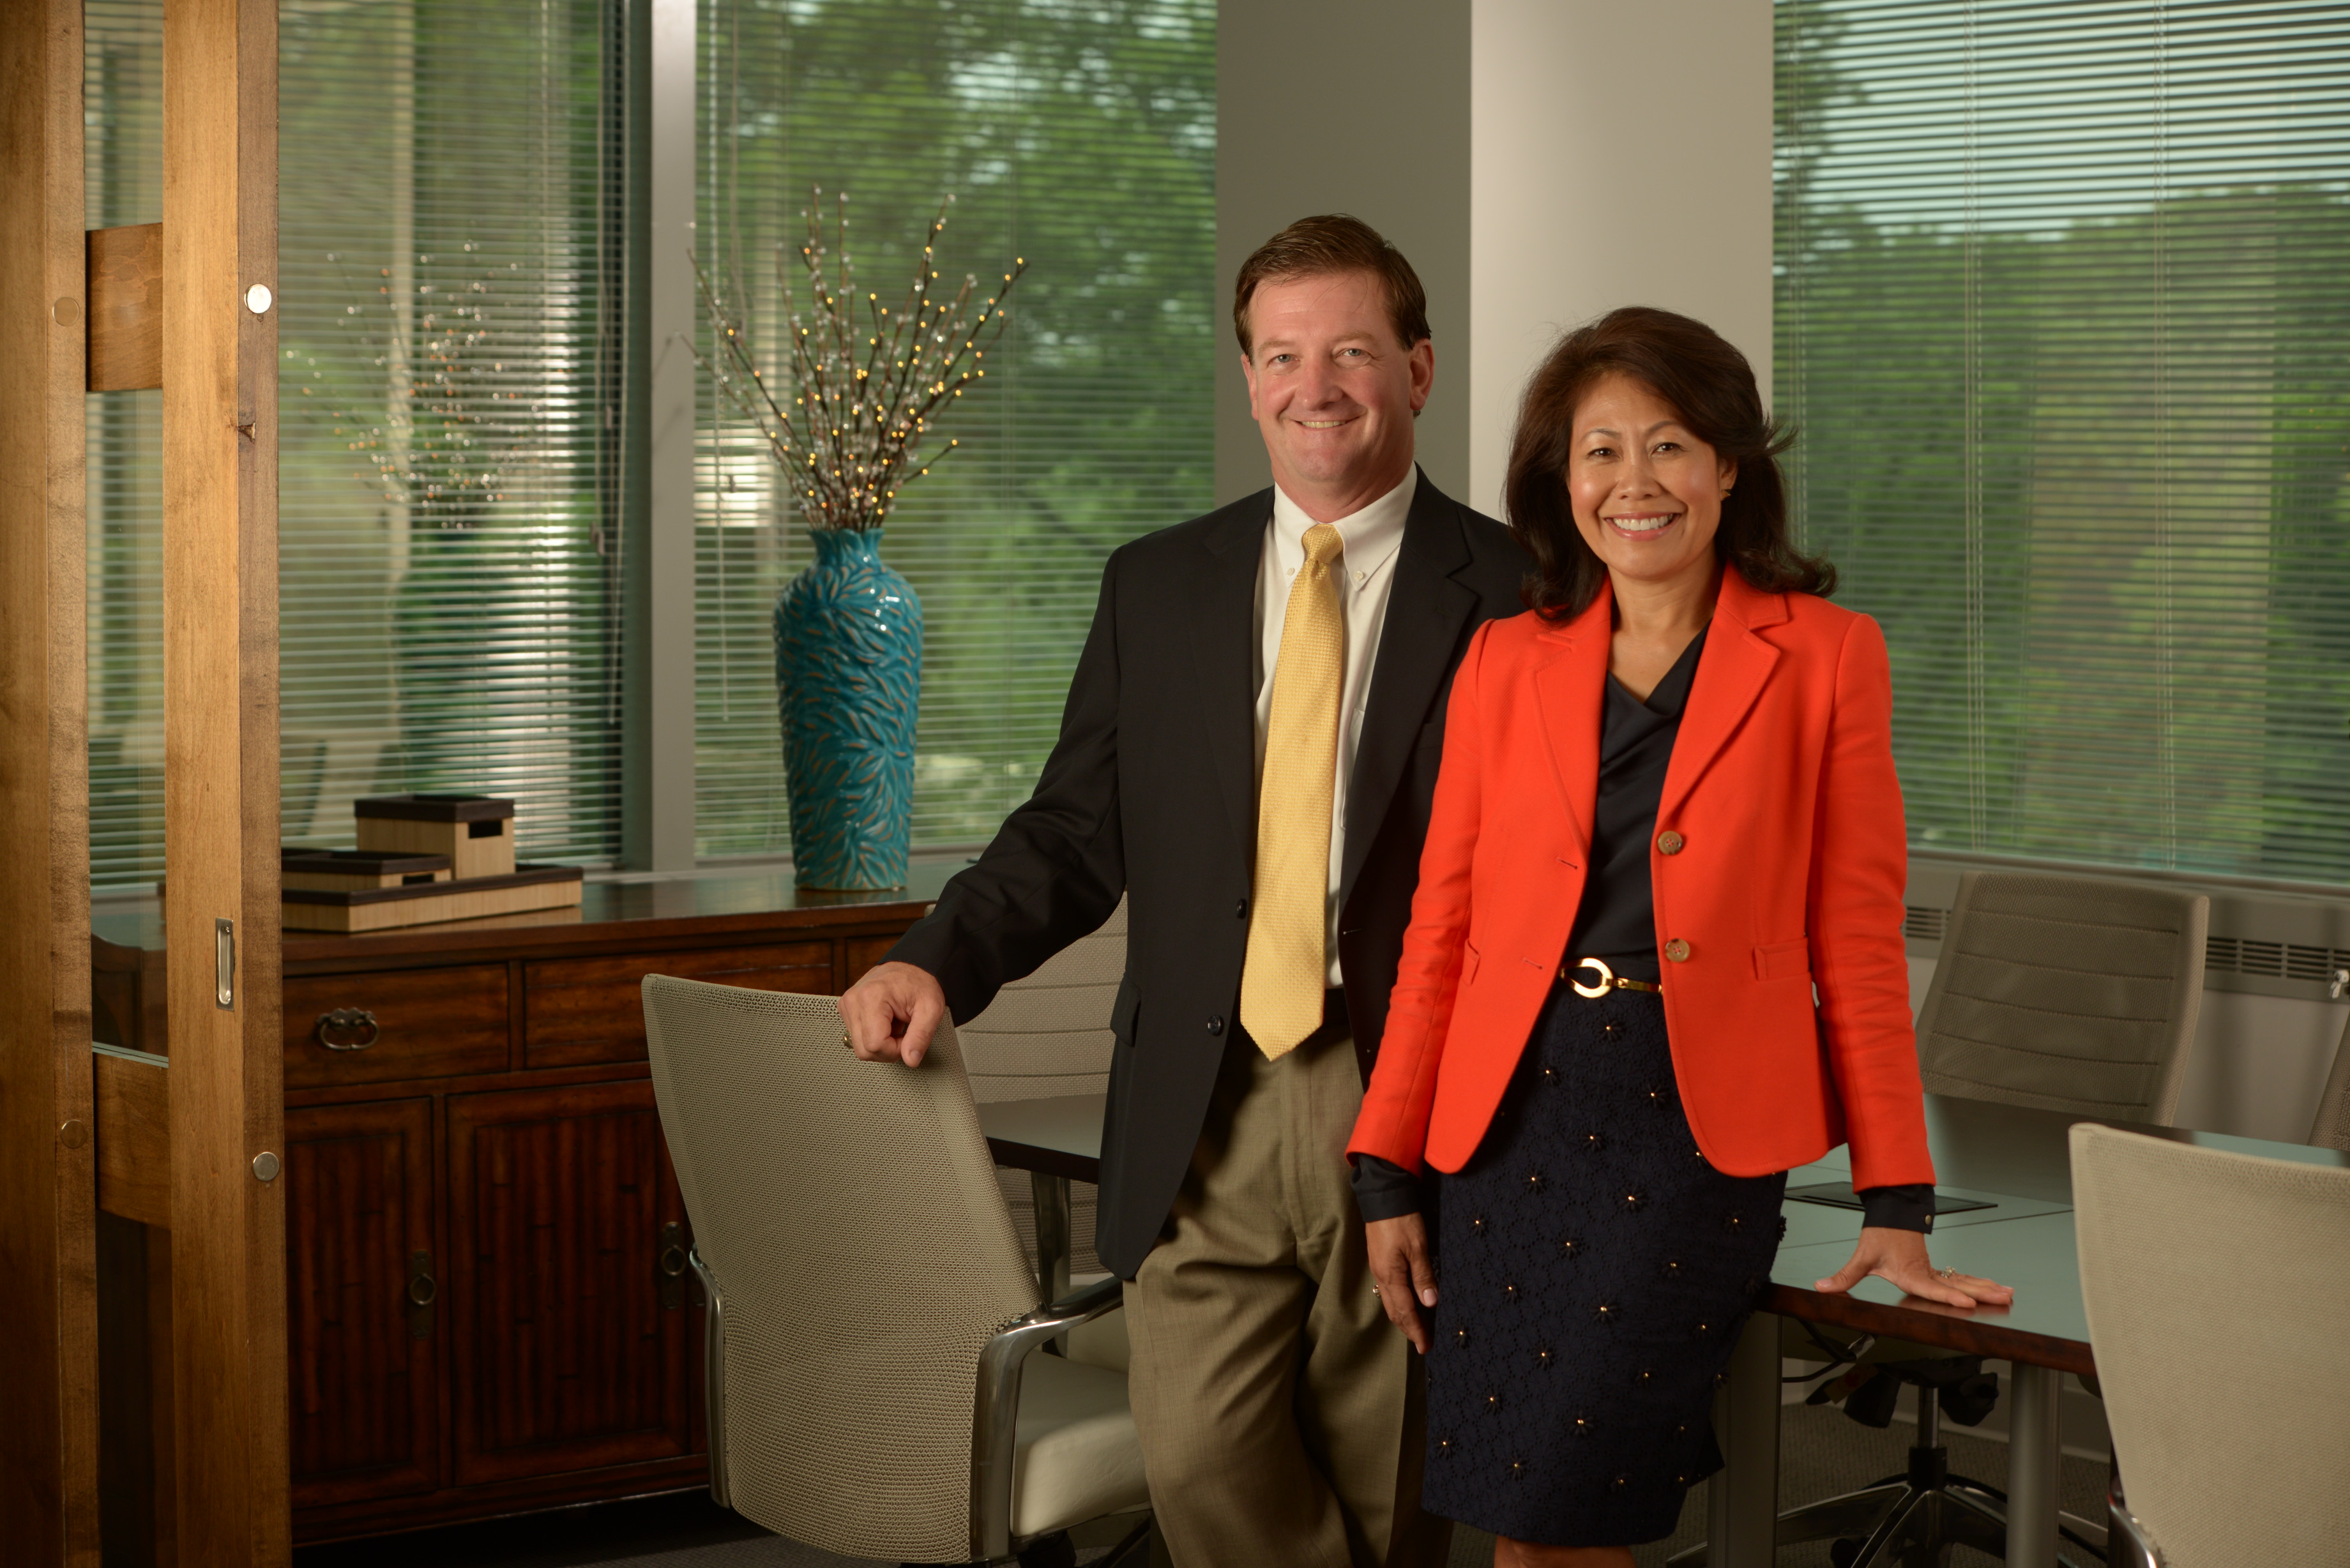 Technically Speaking: A Word or Two with Power Couple Dave and Marie Hartman